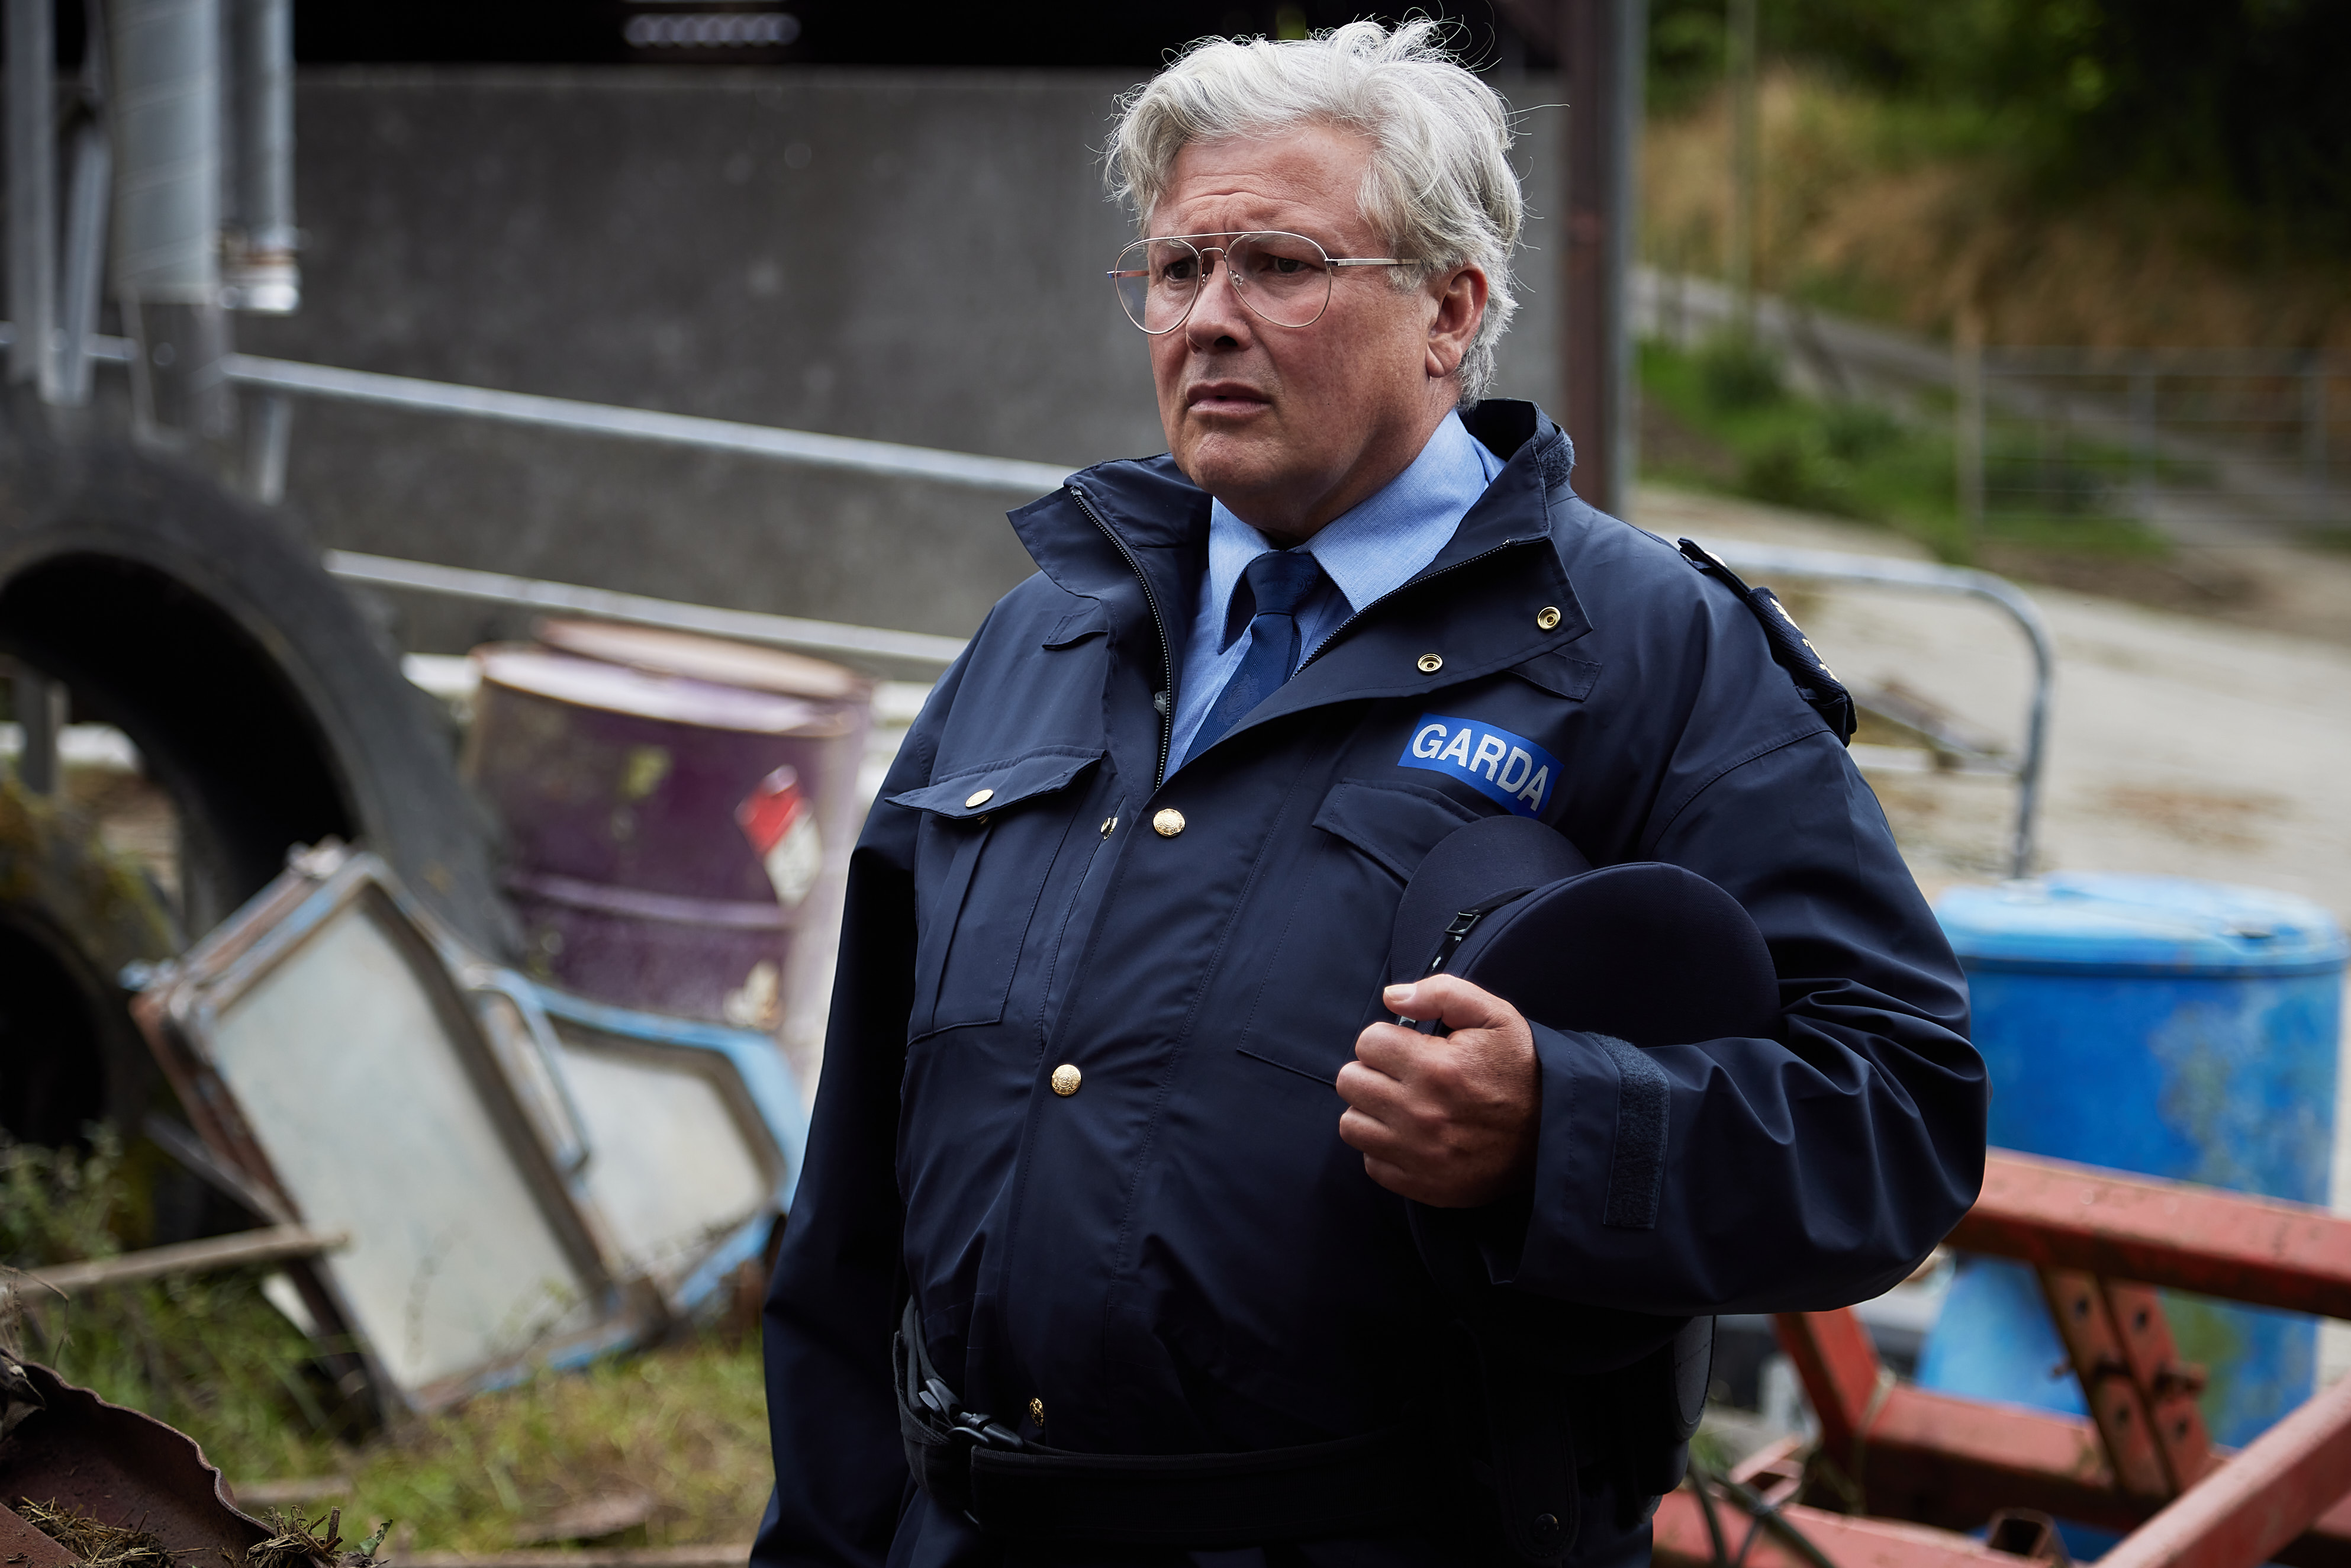 ‘Holding’ – Conleth Hill as Sergeant PJ Collins (image courtesy of Britbox)